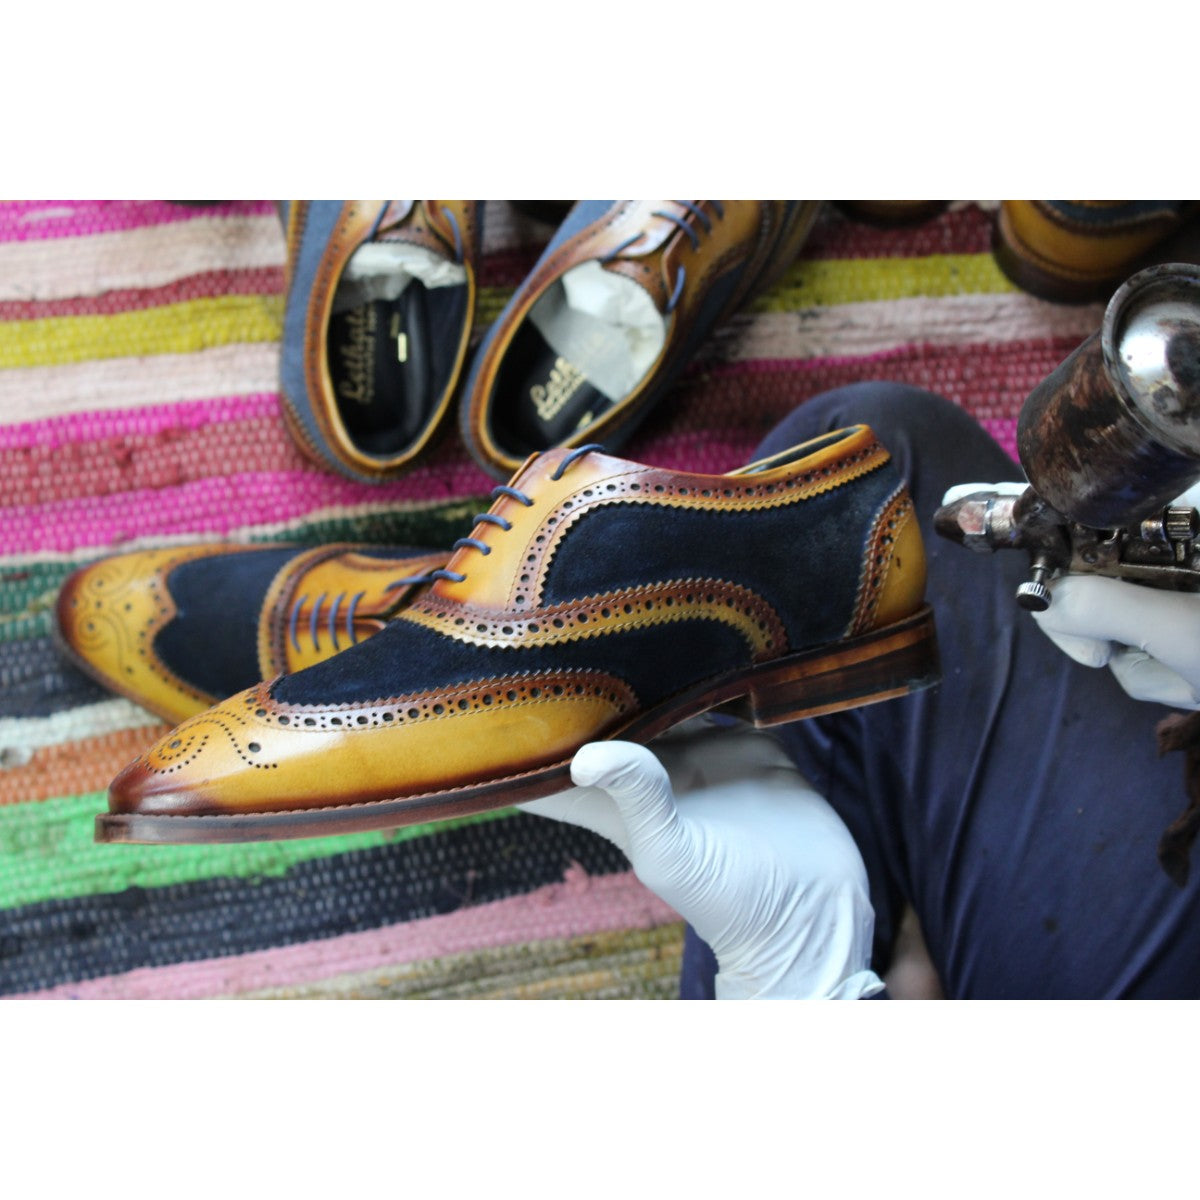 Batu-B Leather Shoes  Finest Quality of Hand Made Shoes